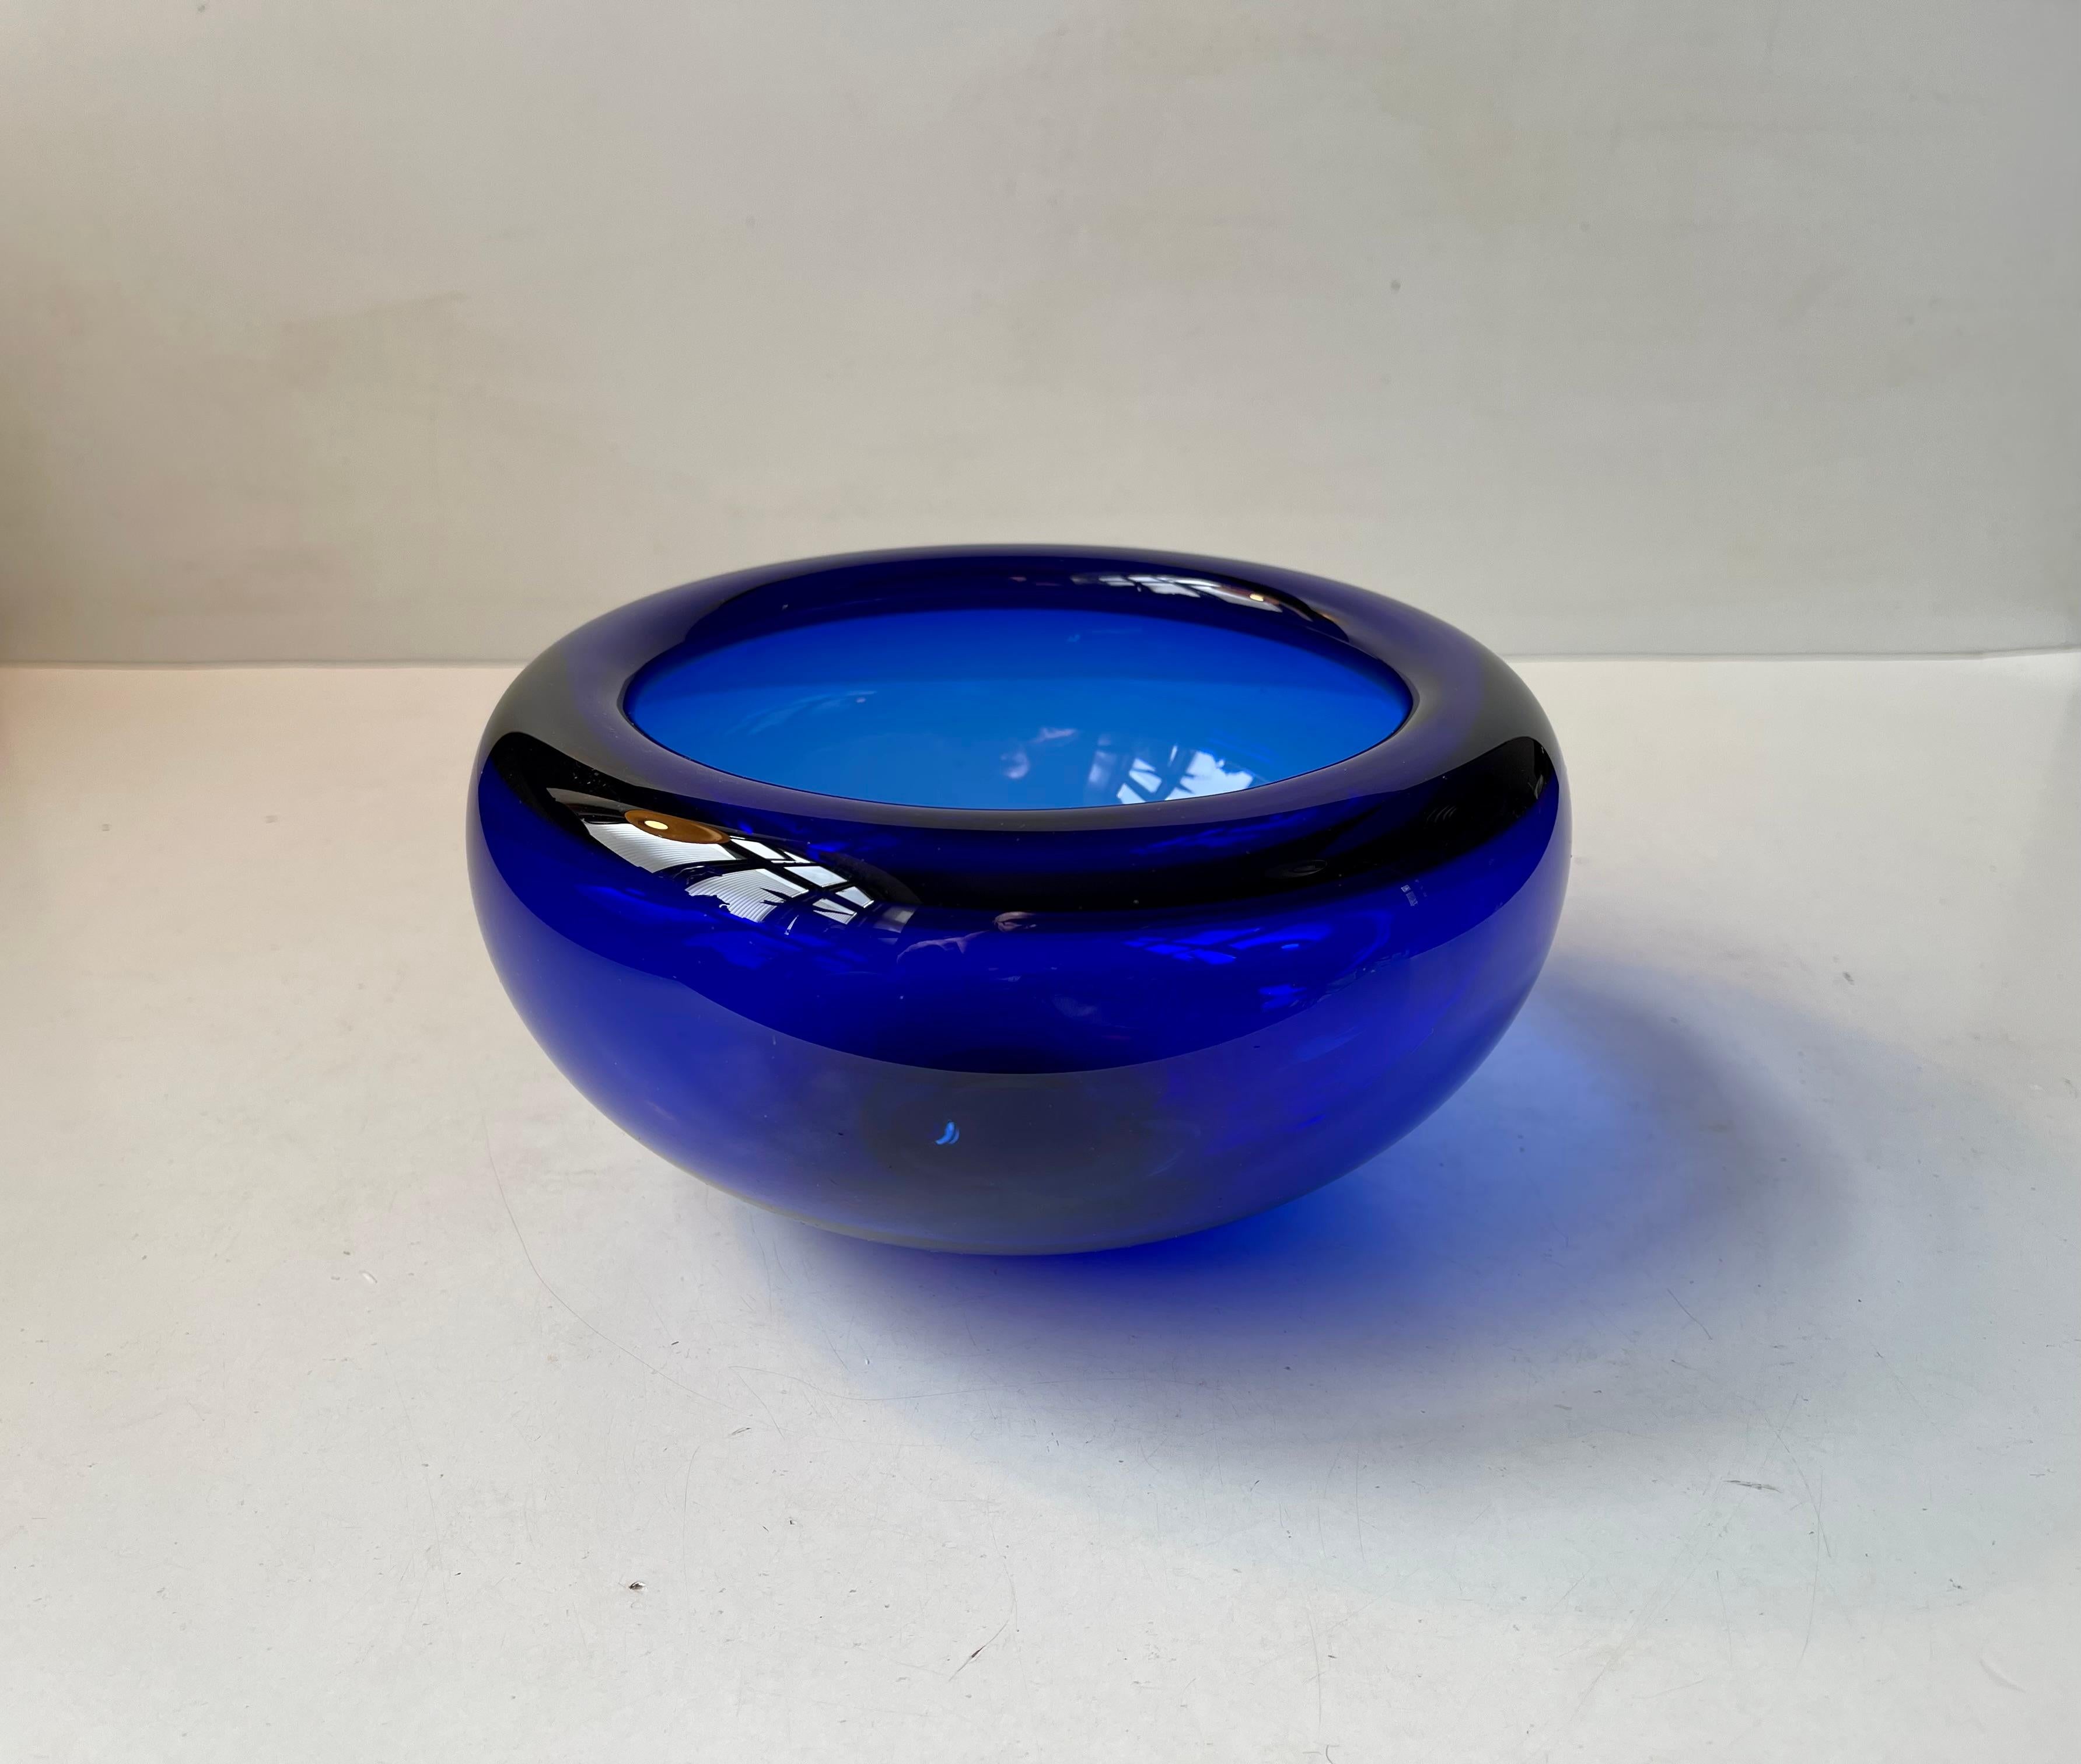 Handblown sapphire blue bowl designed by Per Lütken in 1955. This piece was manufactured at Holmegaard in Denmark during the mid 1970s. It is called Saphire Blue Provence. Measurements: D: 19 cm, H: 9.5 cm.